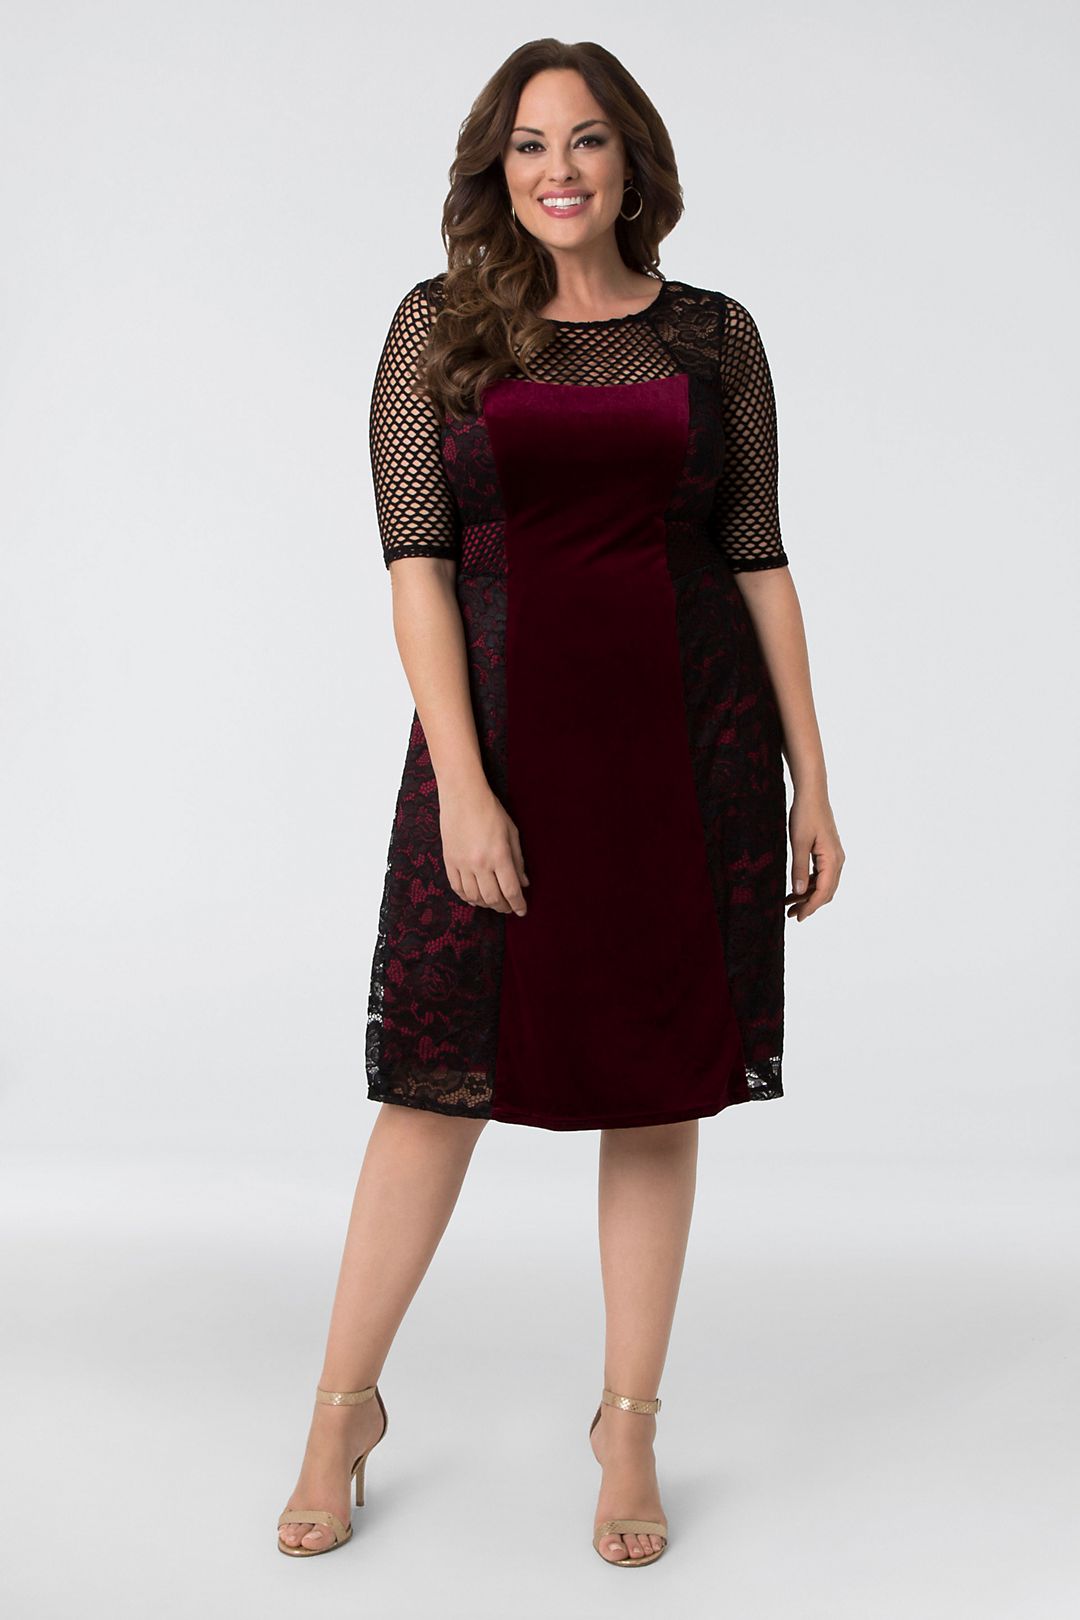 Mixed Lace and Mesh Plus Size Cocktail Dress Image 3